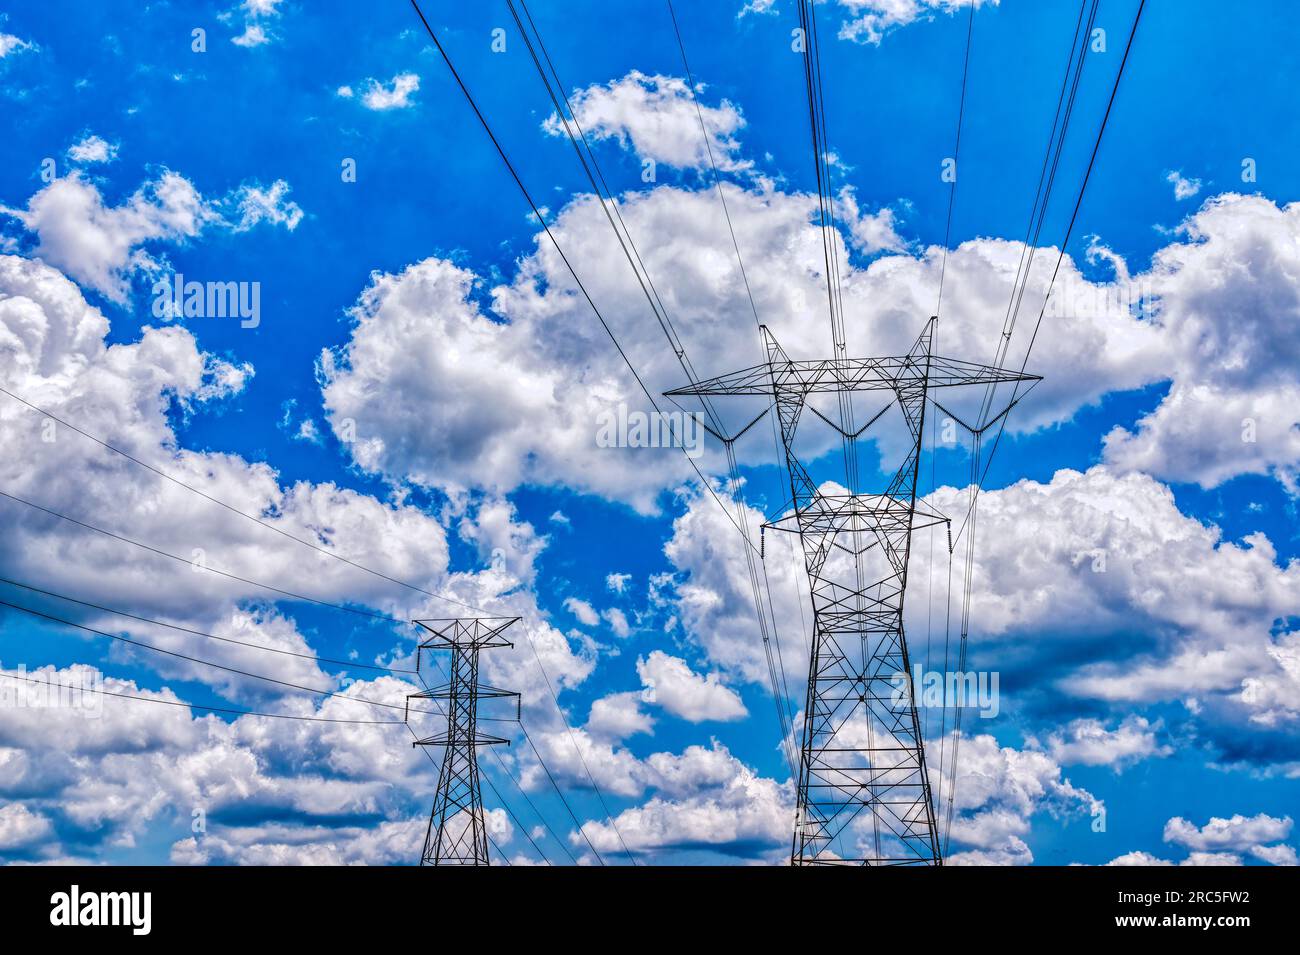 Horizontal shot of main electric towers against puffy white clouds in a blue sky. Stock Photo